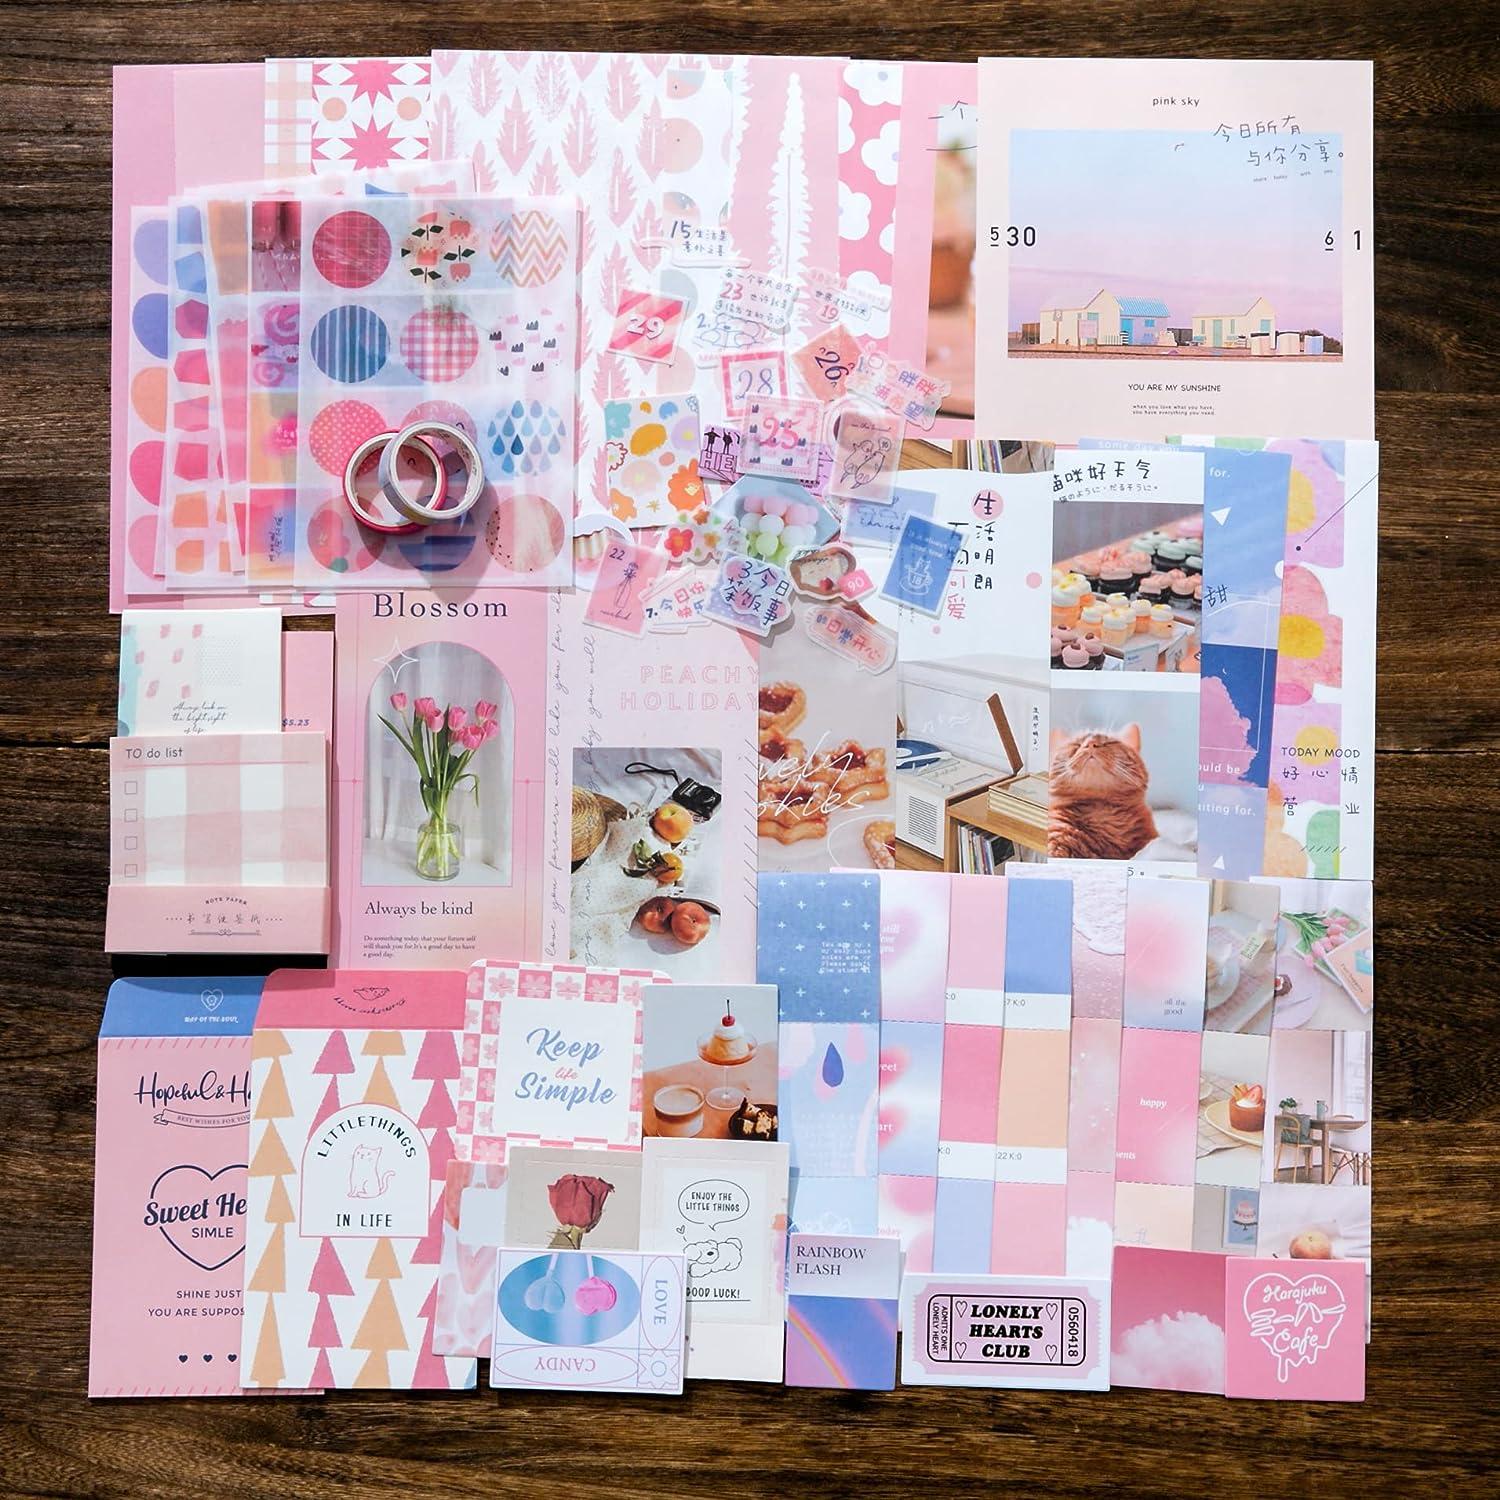 DIY Unicorn Journaling Set/Scrapbook Kit for Girls - Includes Bullet Journal & Scrapbooking Supplies Plus Augmented Reality Experience (Stem Toys) Use